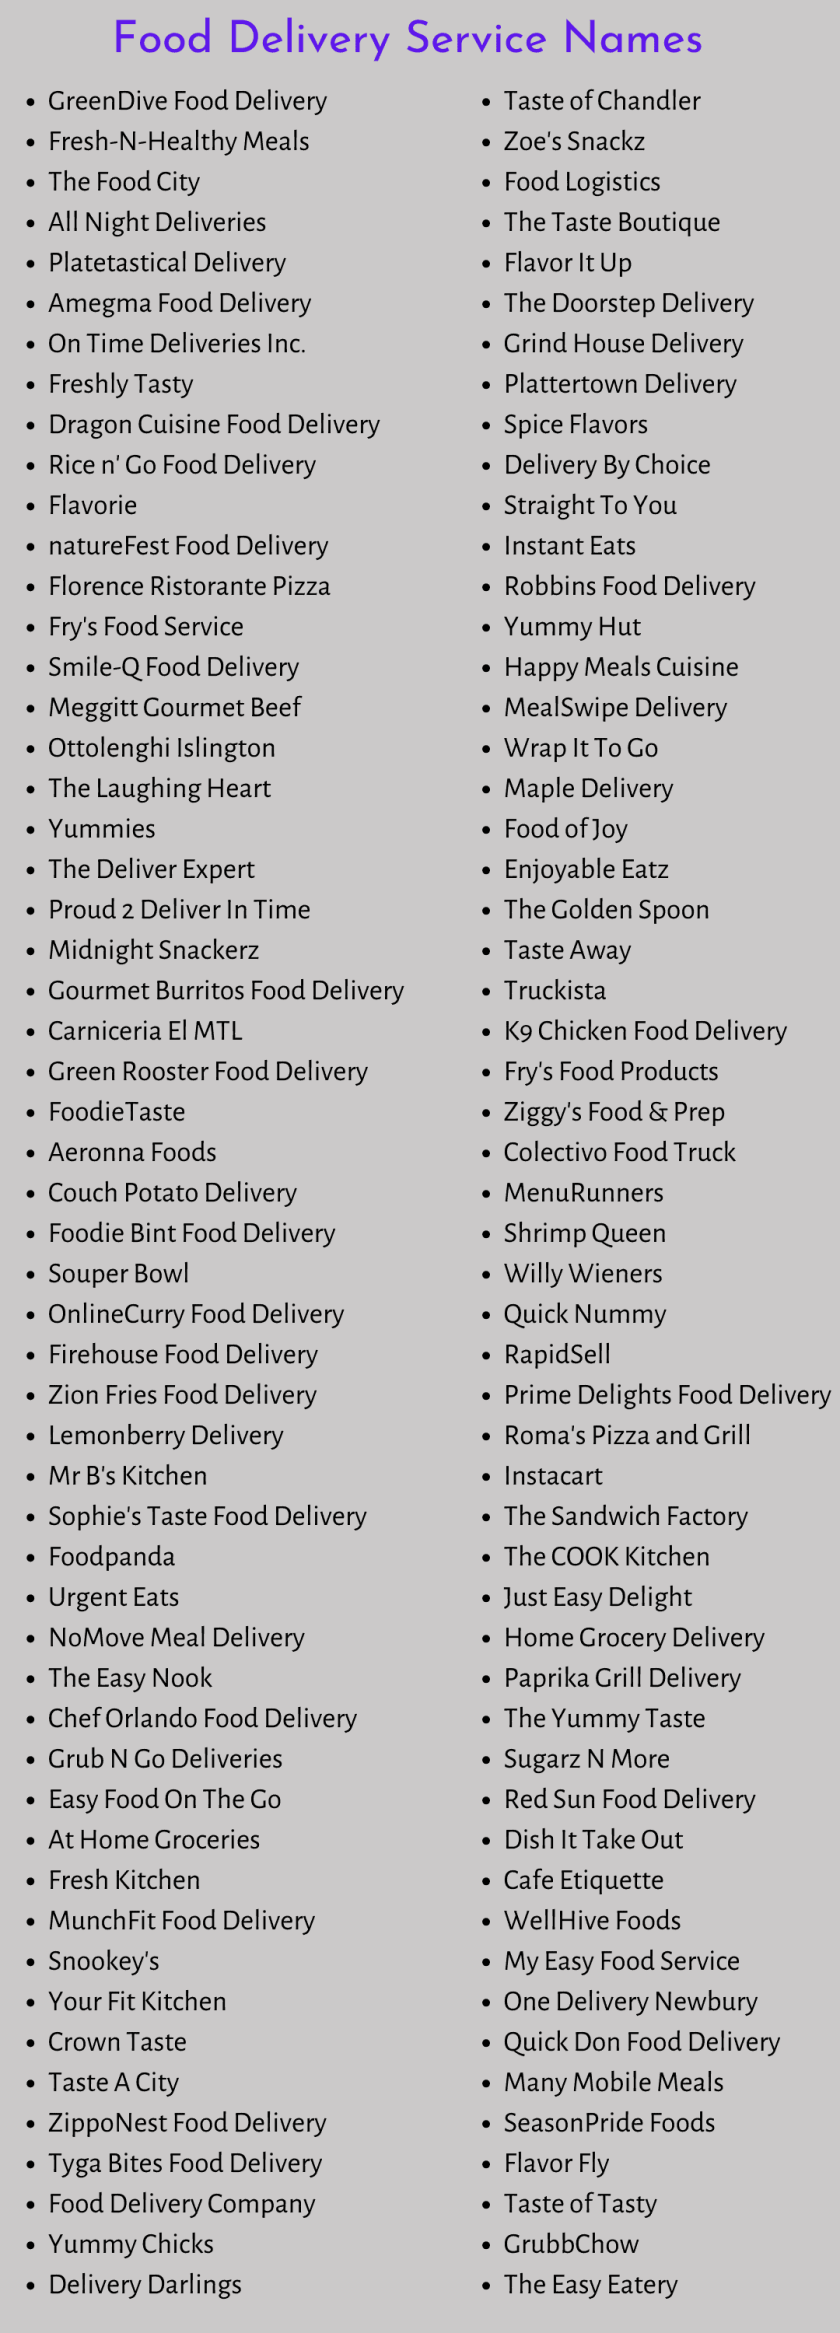 Food Delivery Service Names